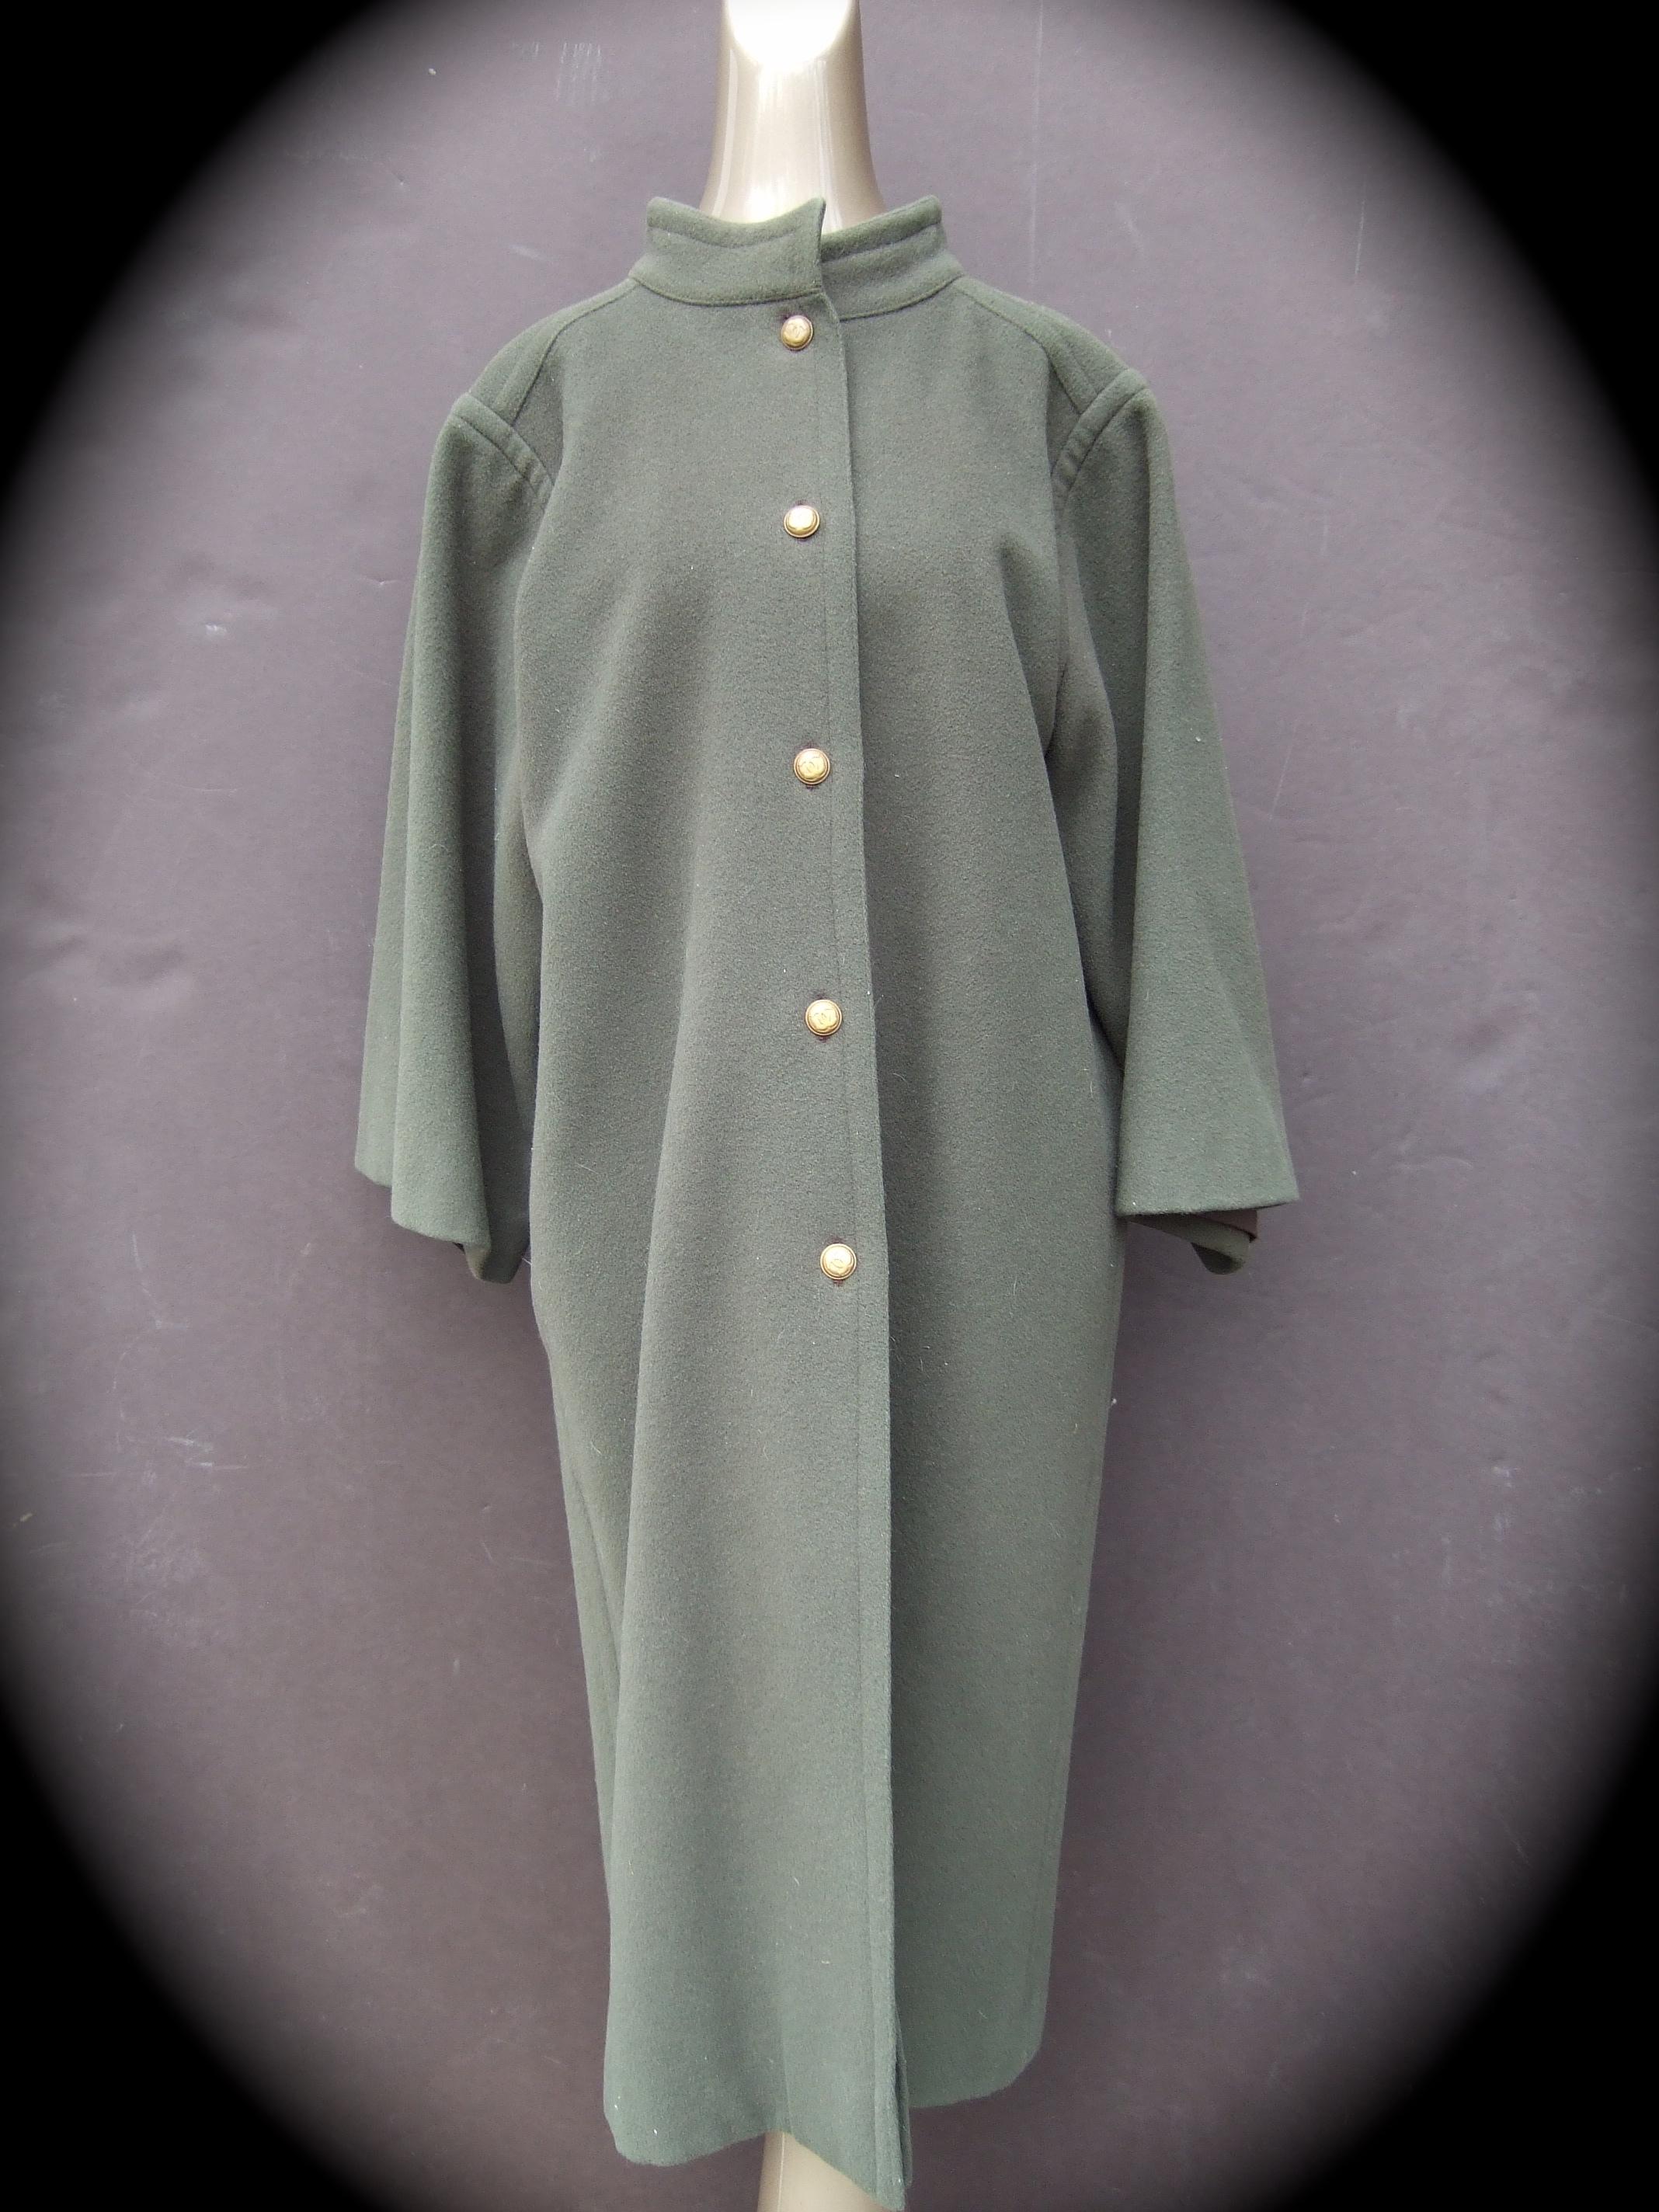 CHANEL Creations Muted Gray - Green Wool Coat with C.C. Buttons c 1980s For Sale 7